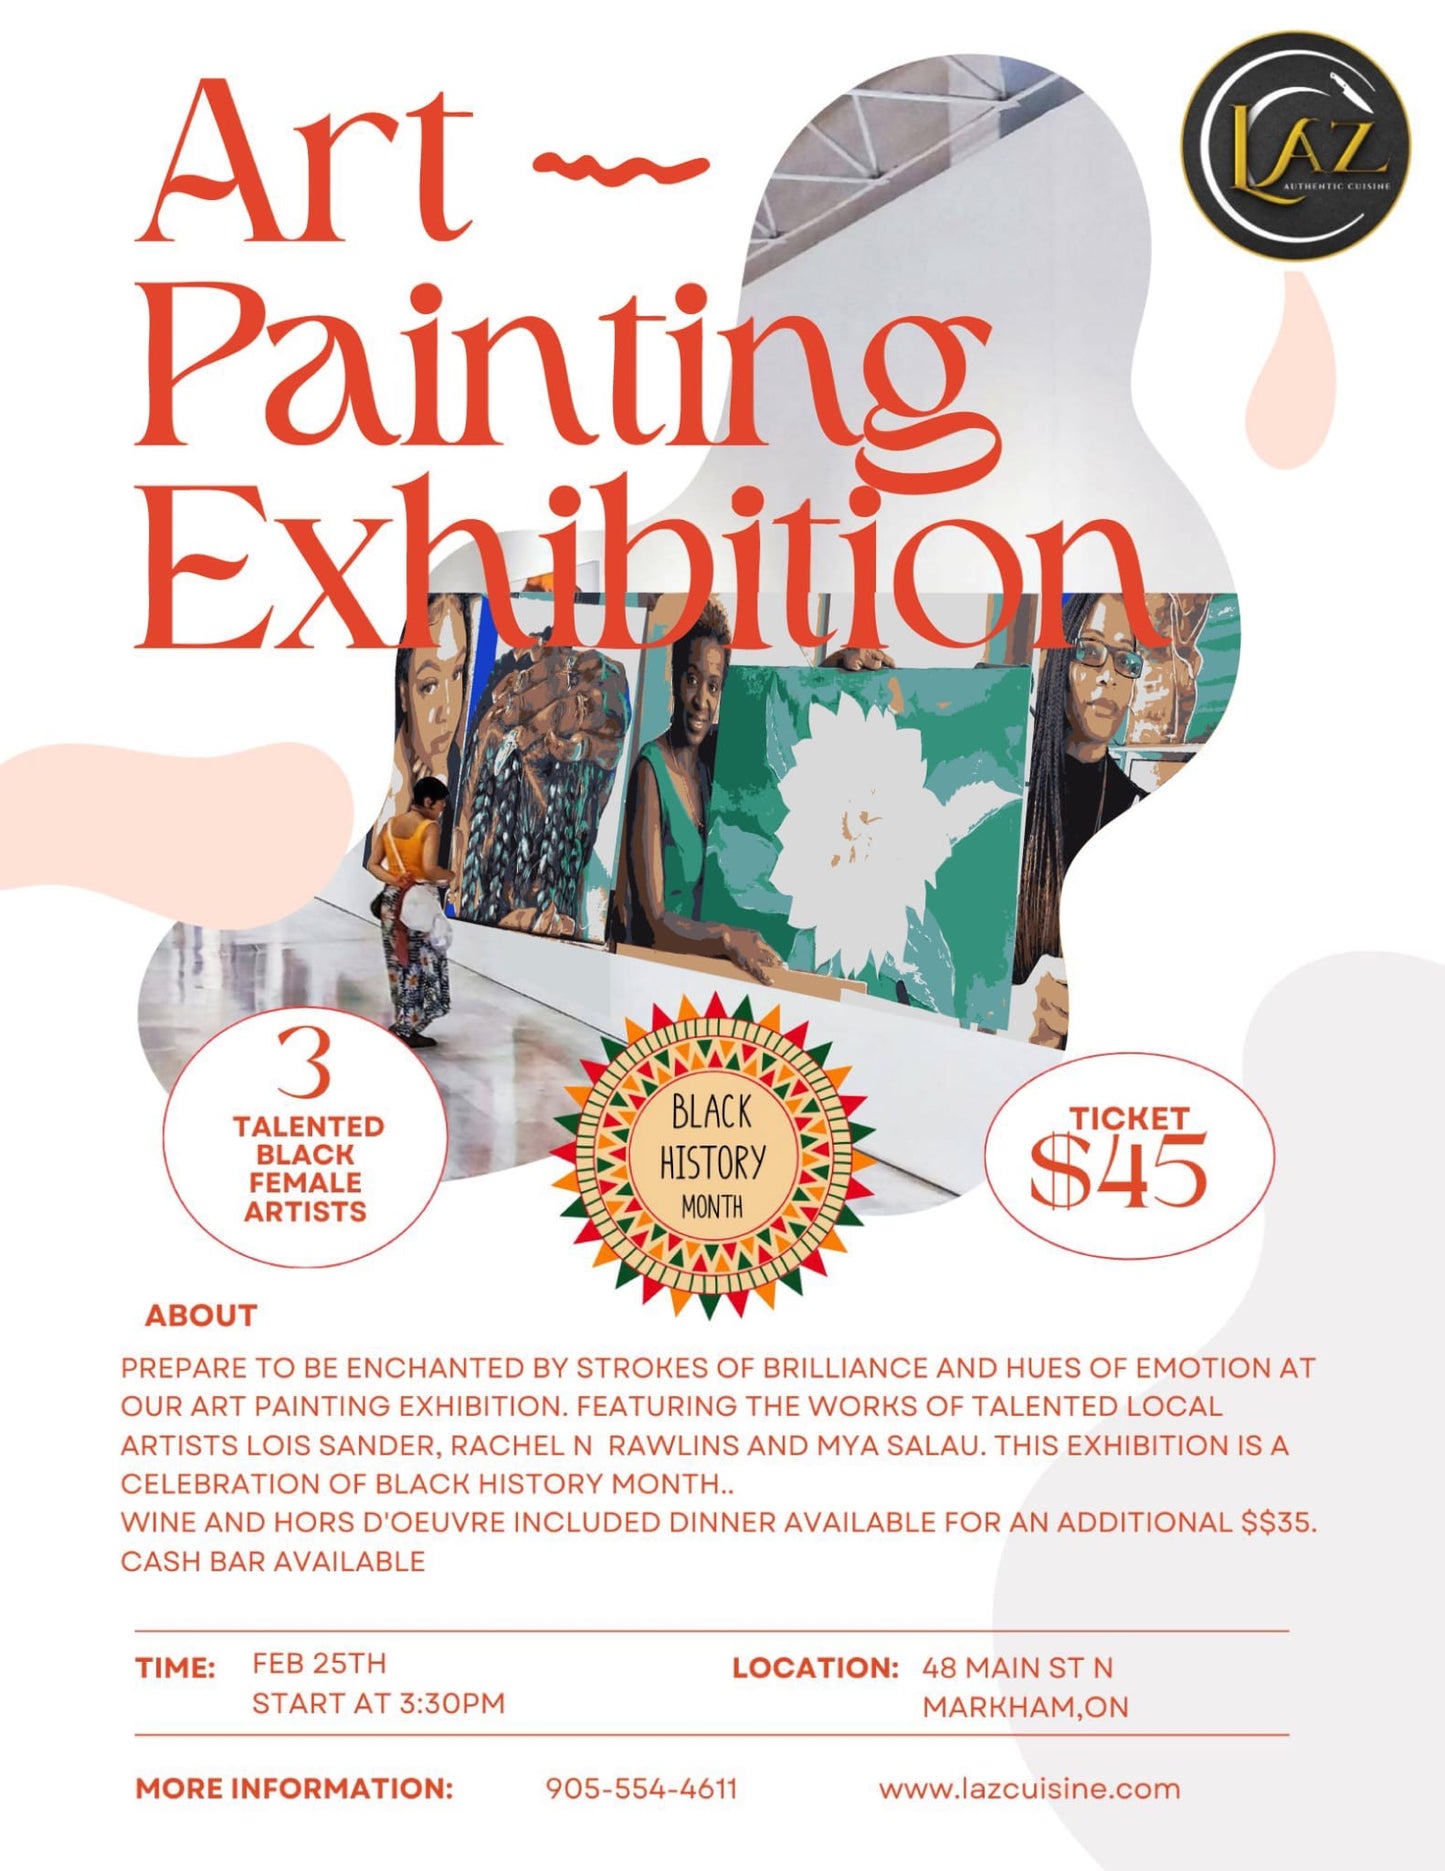 Ticket: Art Painting Exhibition